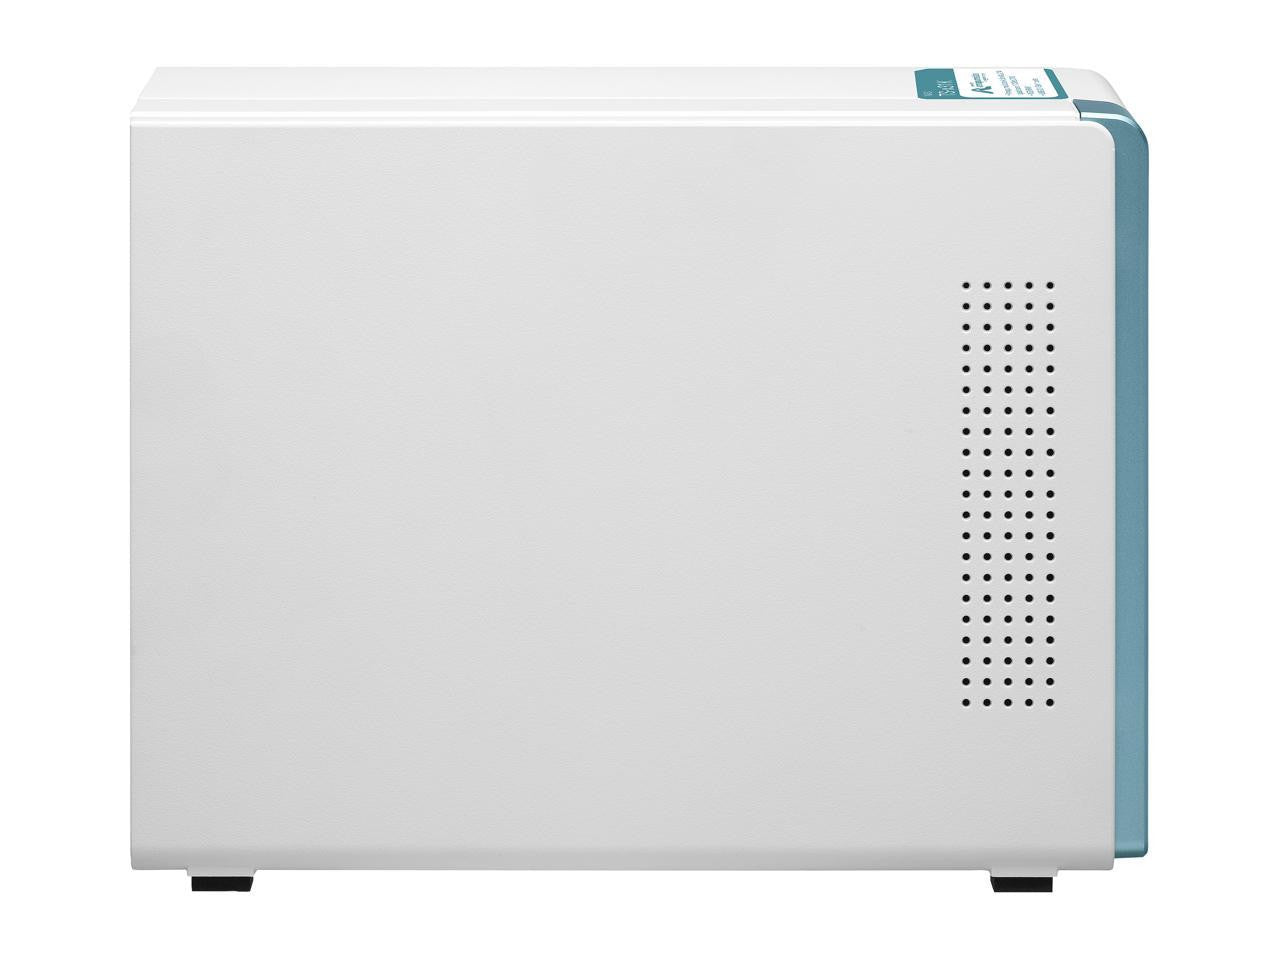 QNAP TS-231K 2-Bay Home NAS with 20TB (2 x 10TB) of Seagate Ironwolf NAS Drives Fully Assembled and Tested